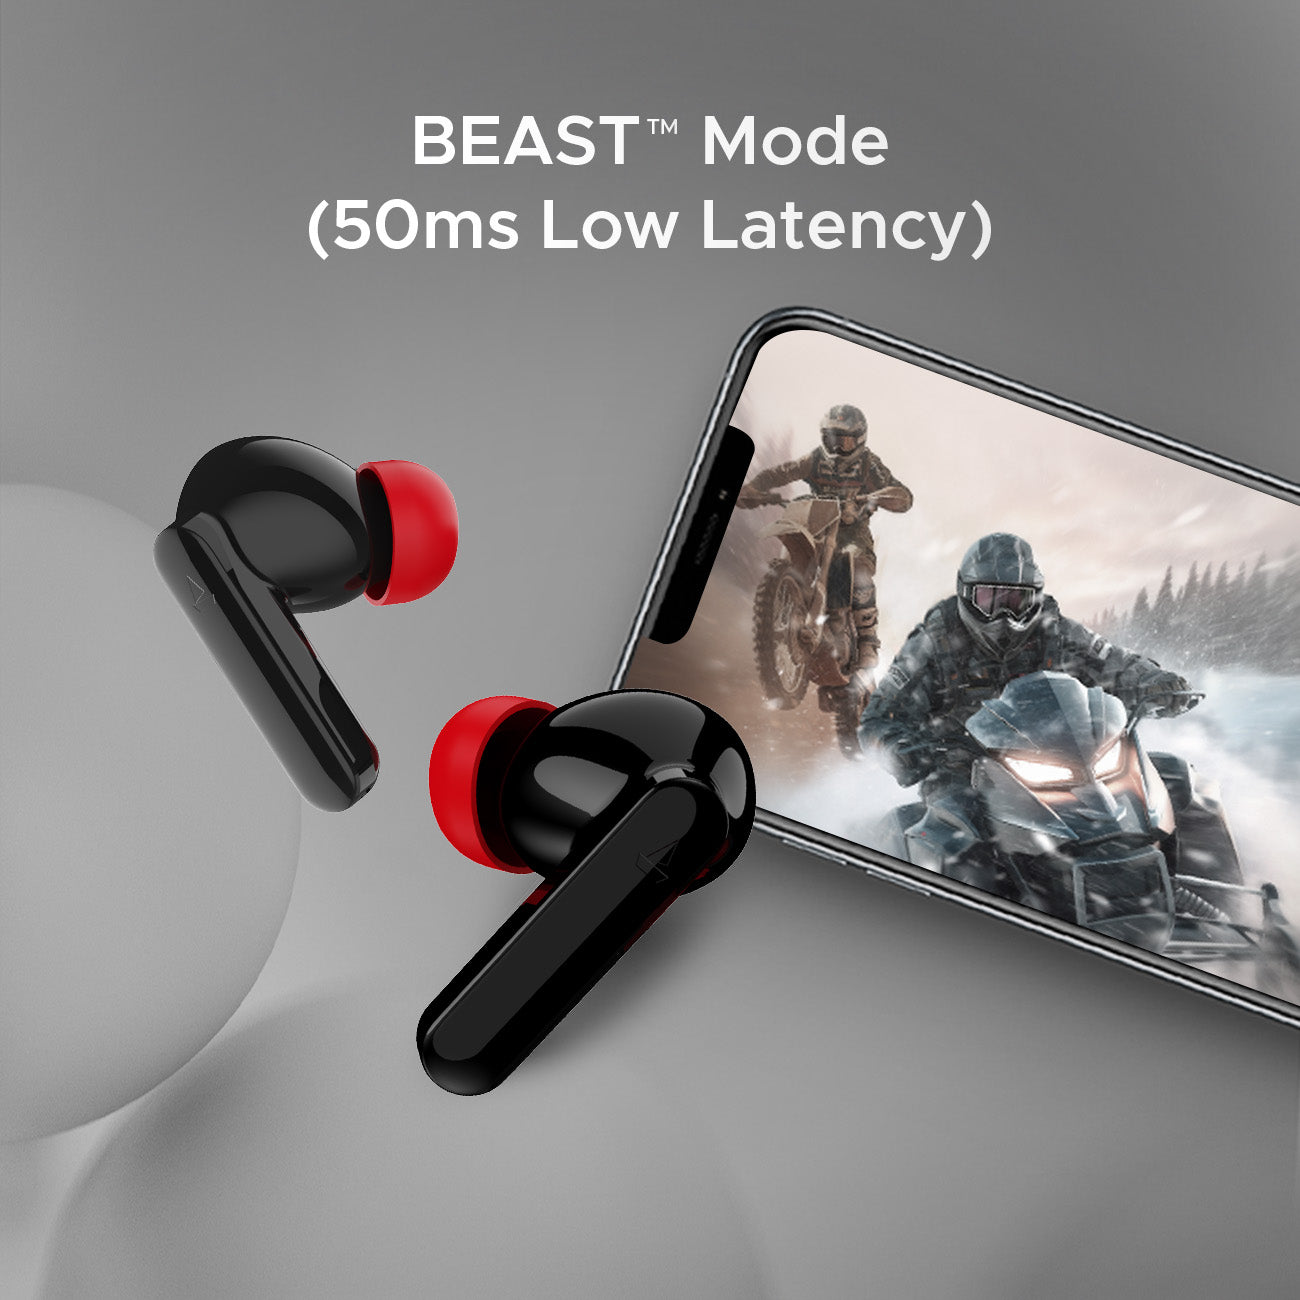 boAt Airdopes Ultra Plus | Wireless Earbuds with 50 Hours Playback, BEAST™ Mode, Quad Mics with ENx™ Tech, IWP™ Technology